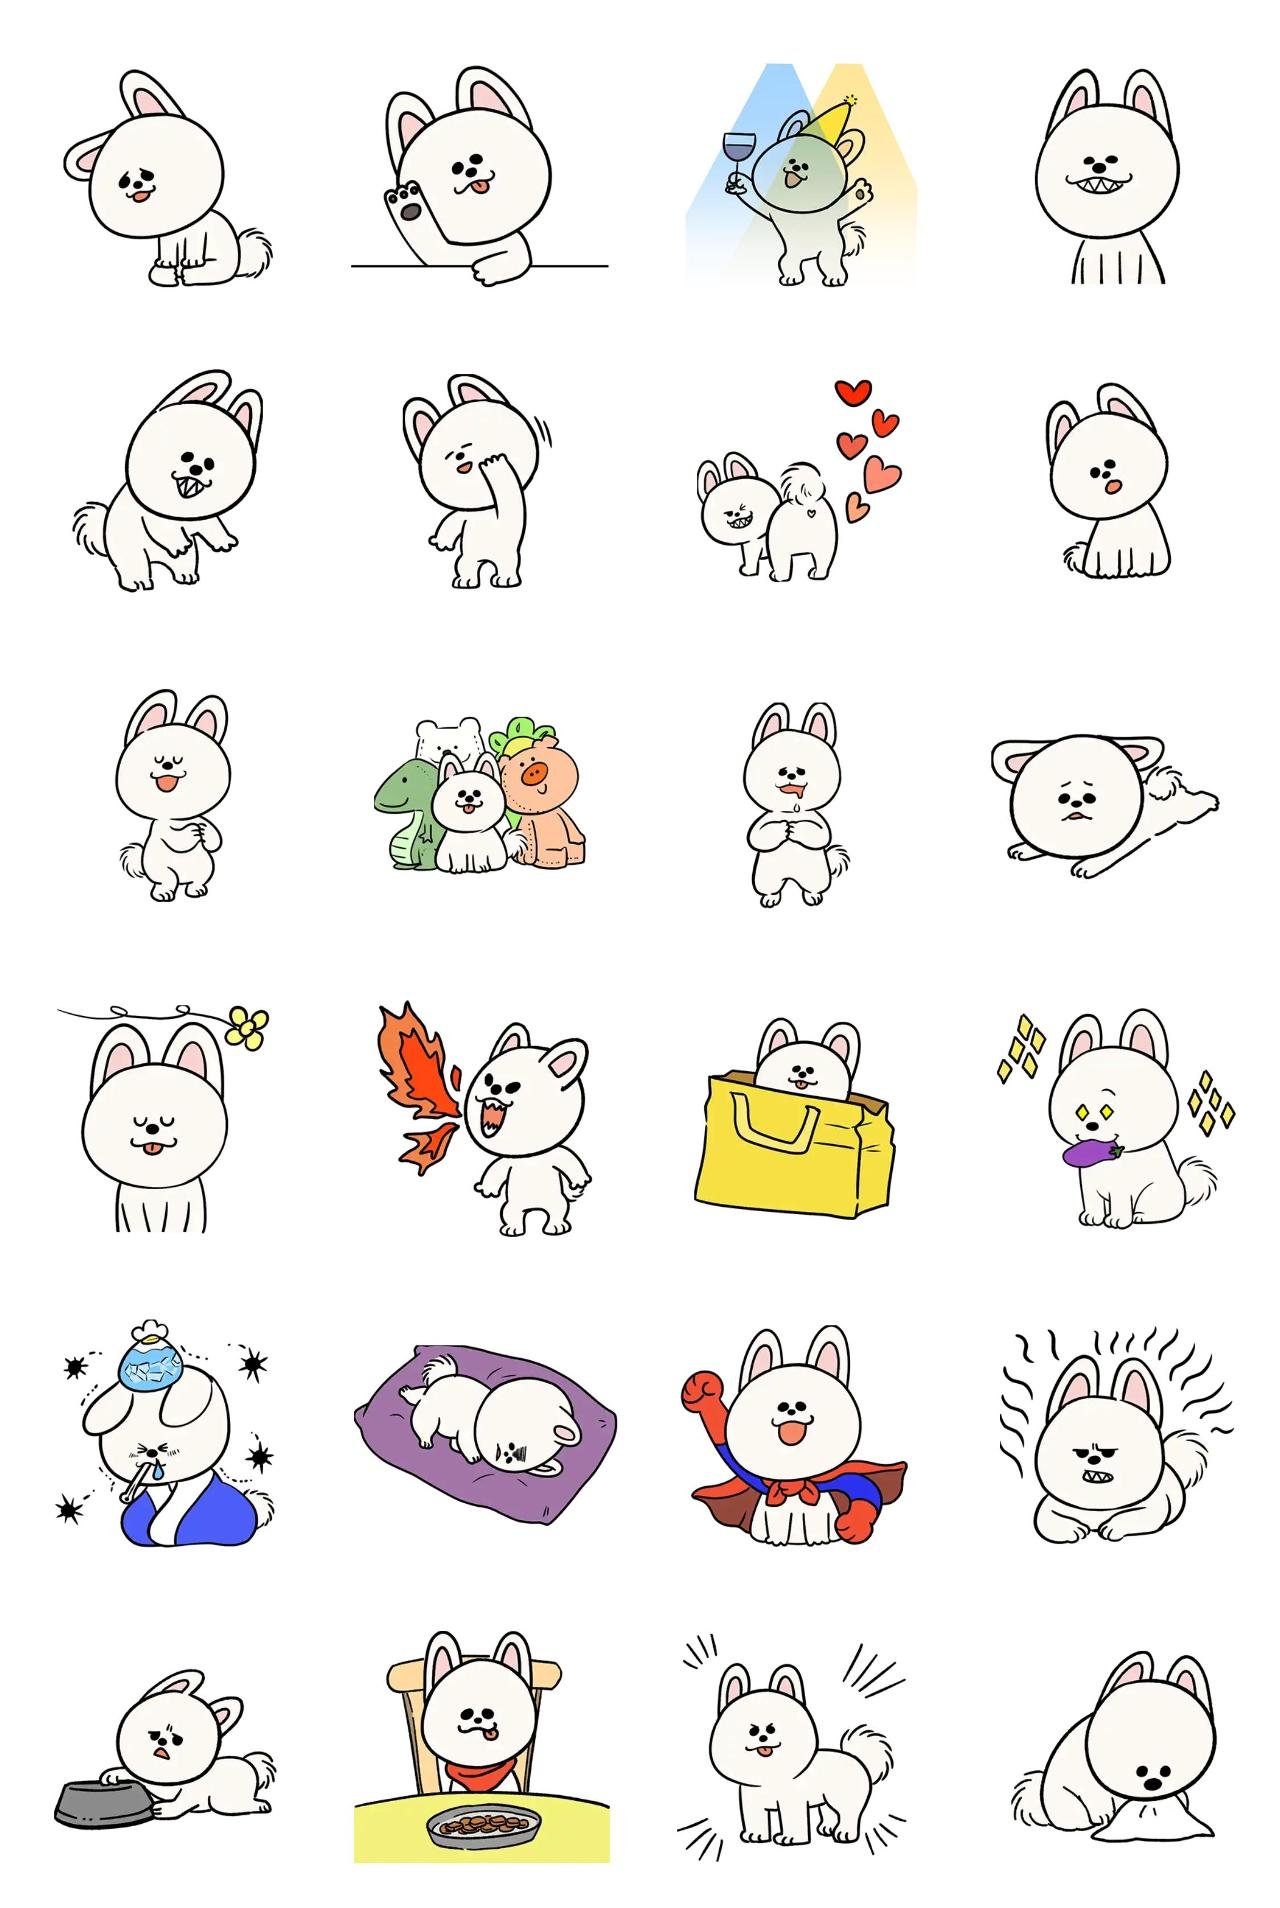 [WANDU]a pup who acts like a human being Animals sticker pack for Whatsapp, Telegram, Signal, and others chatting and message apps